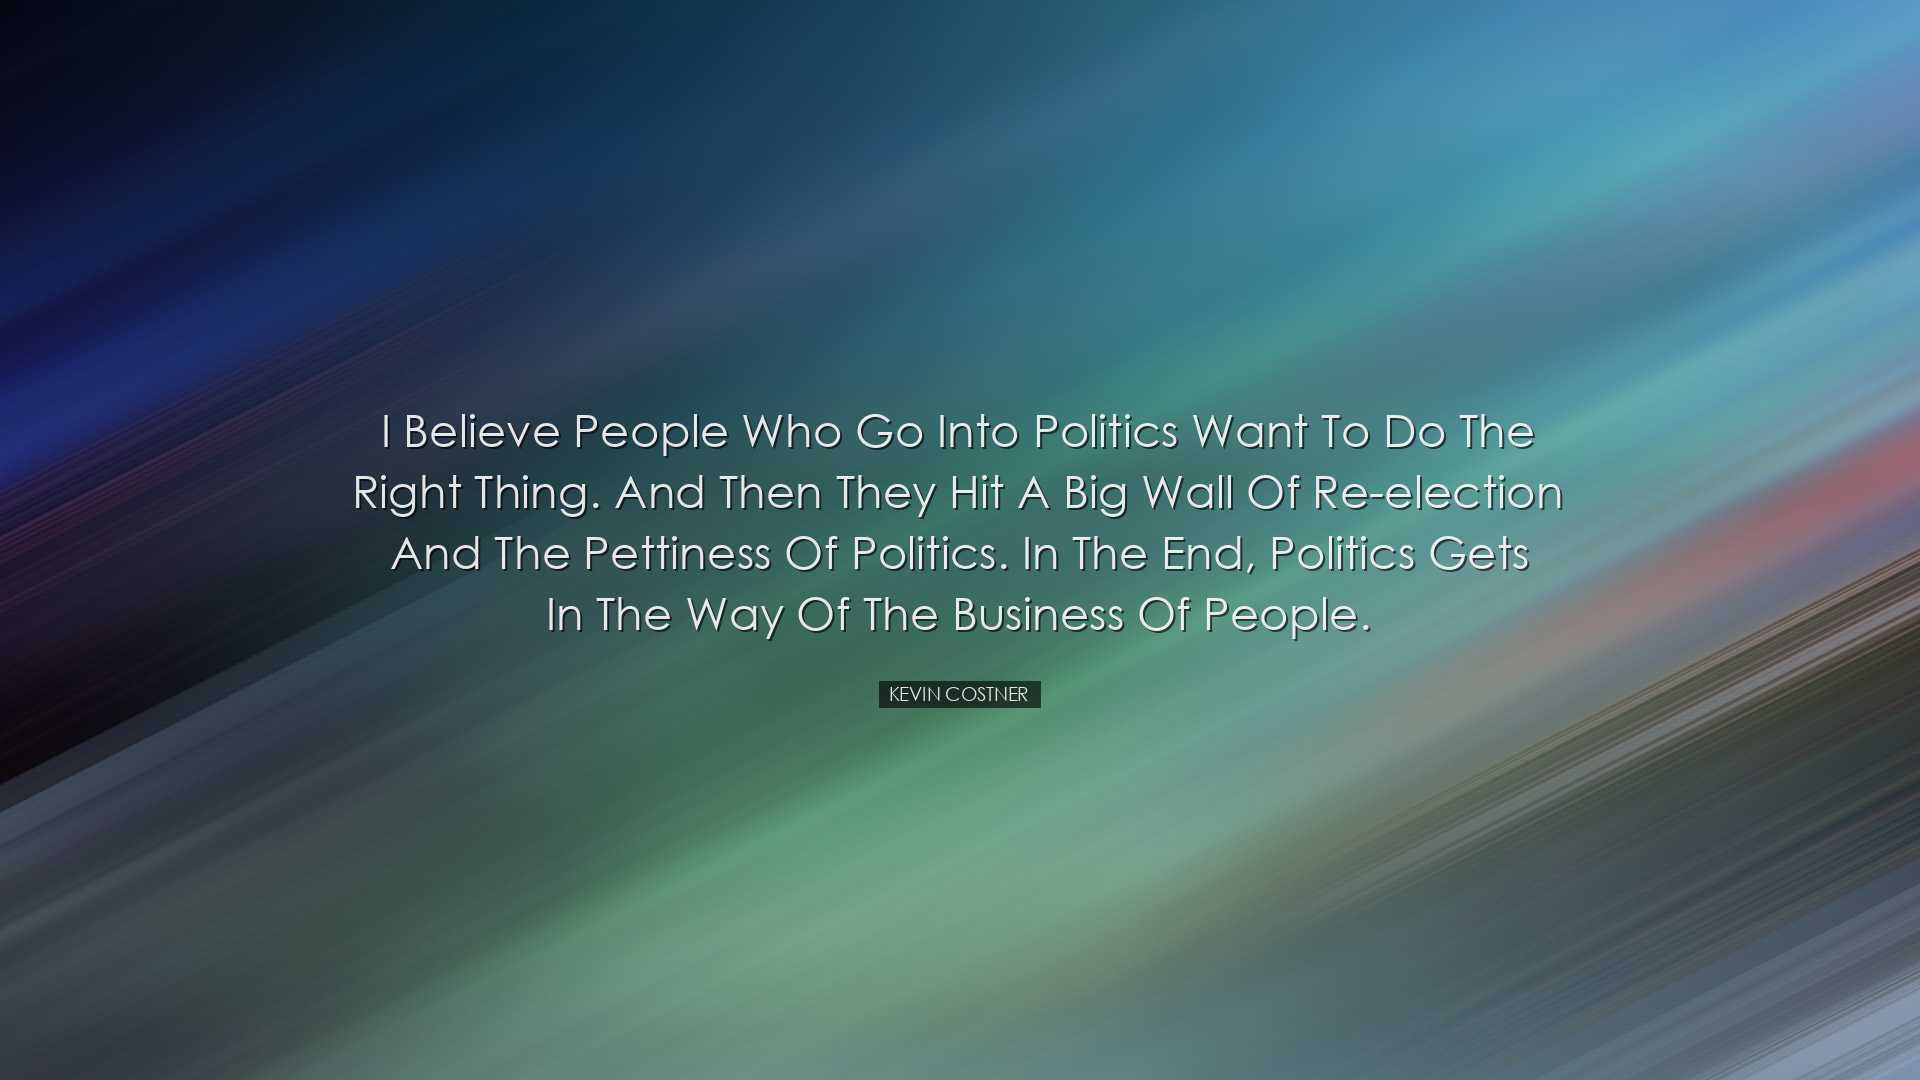 I believe people who go into politics want to do the right thing.